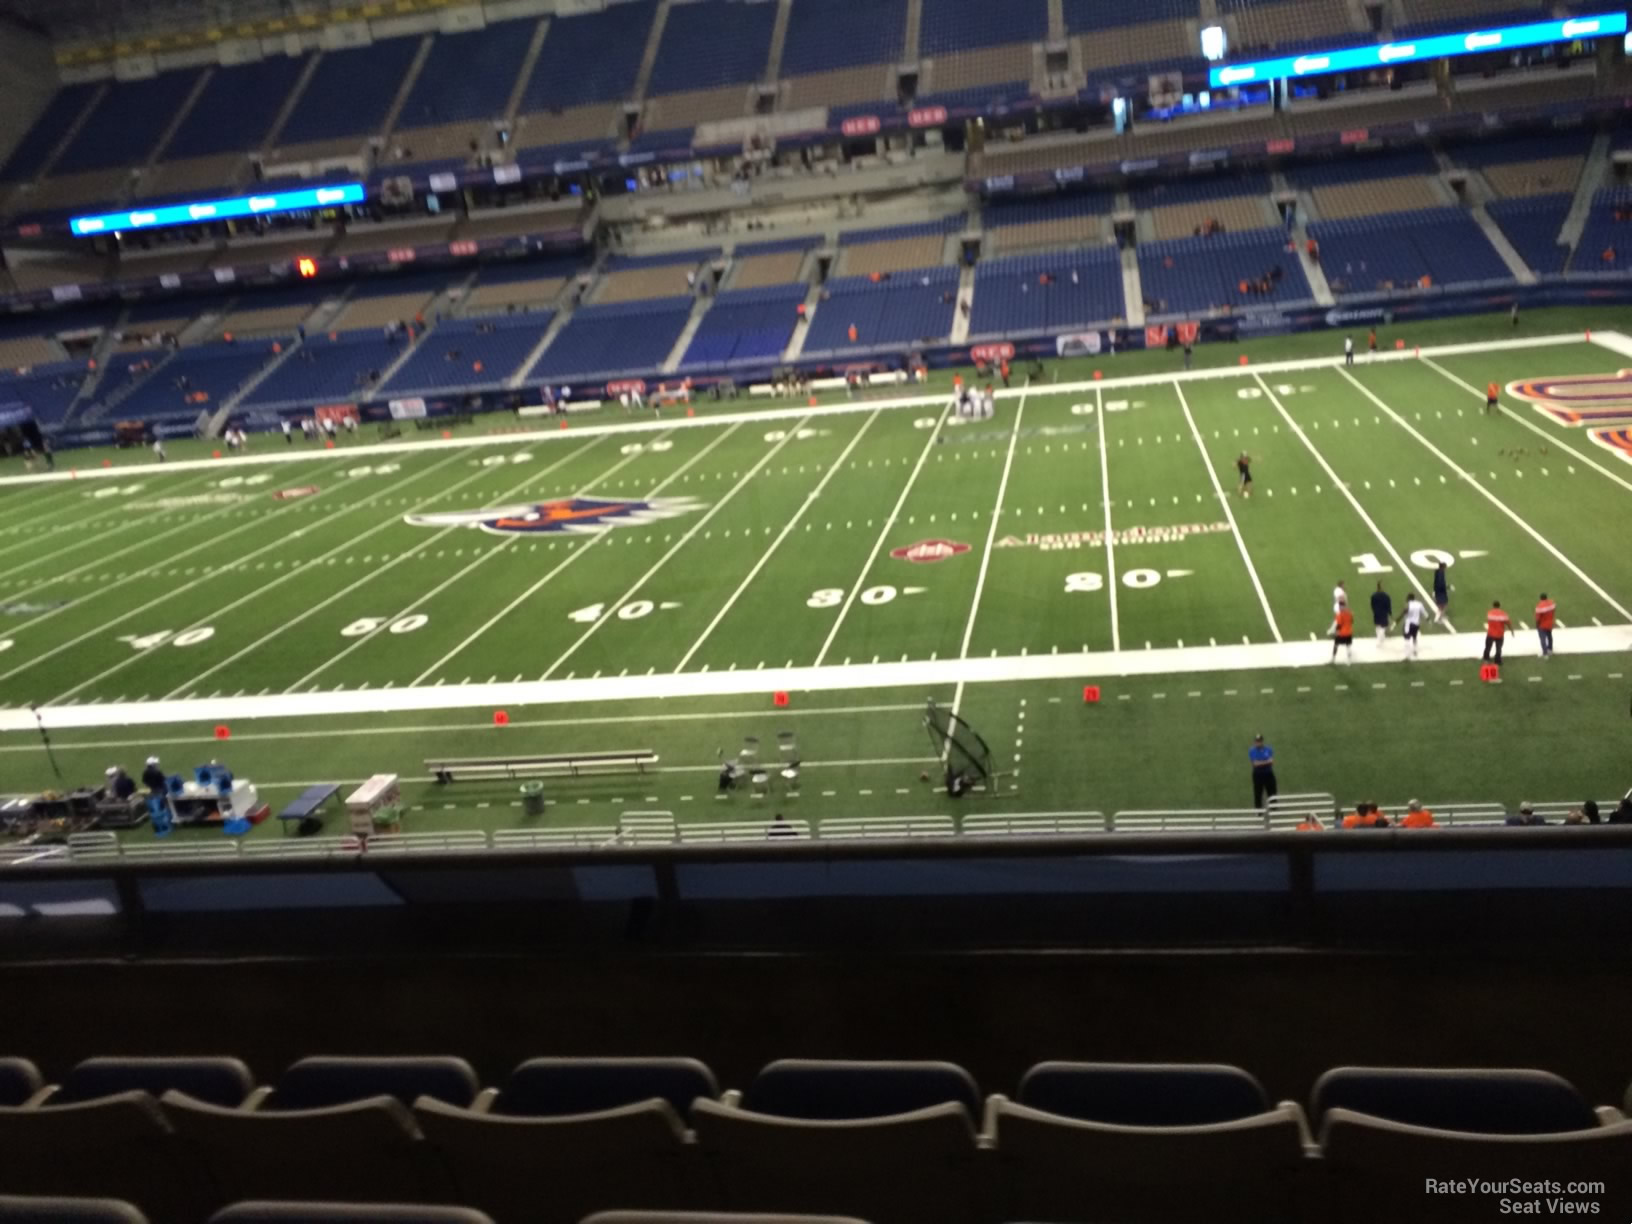 section 232, row 5 seat view  for football - alamodome